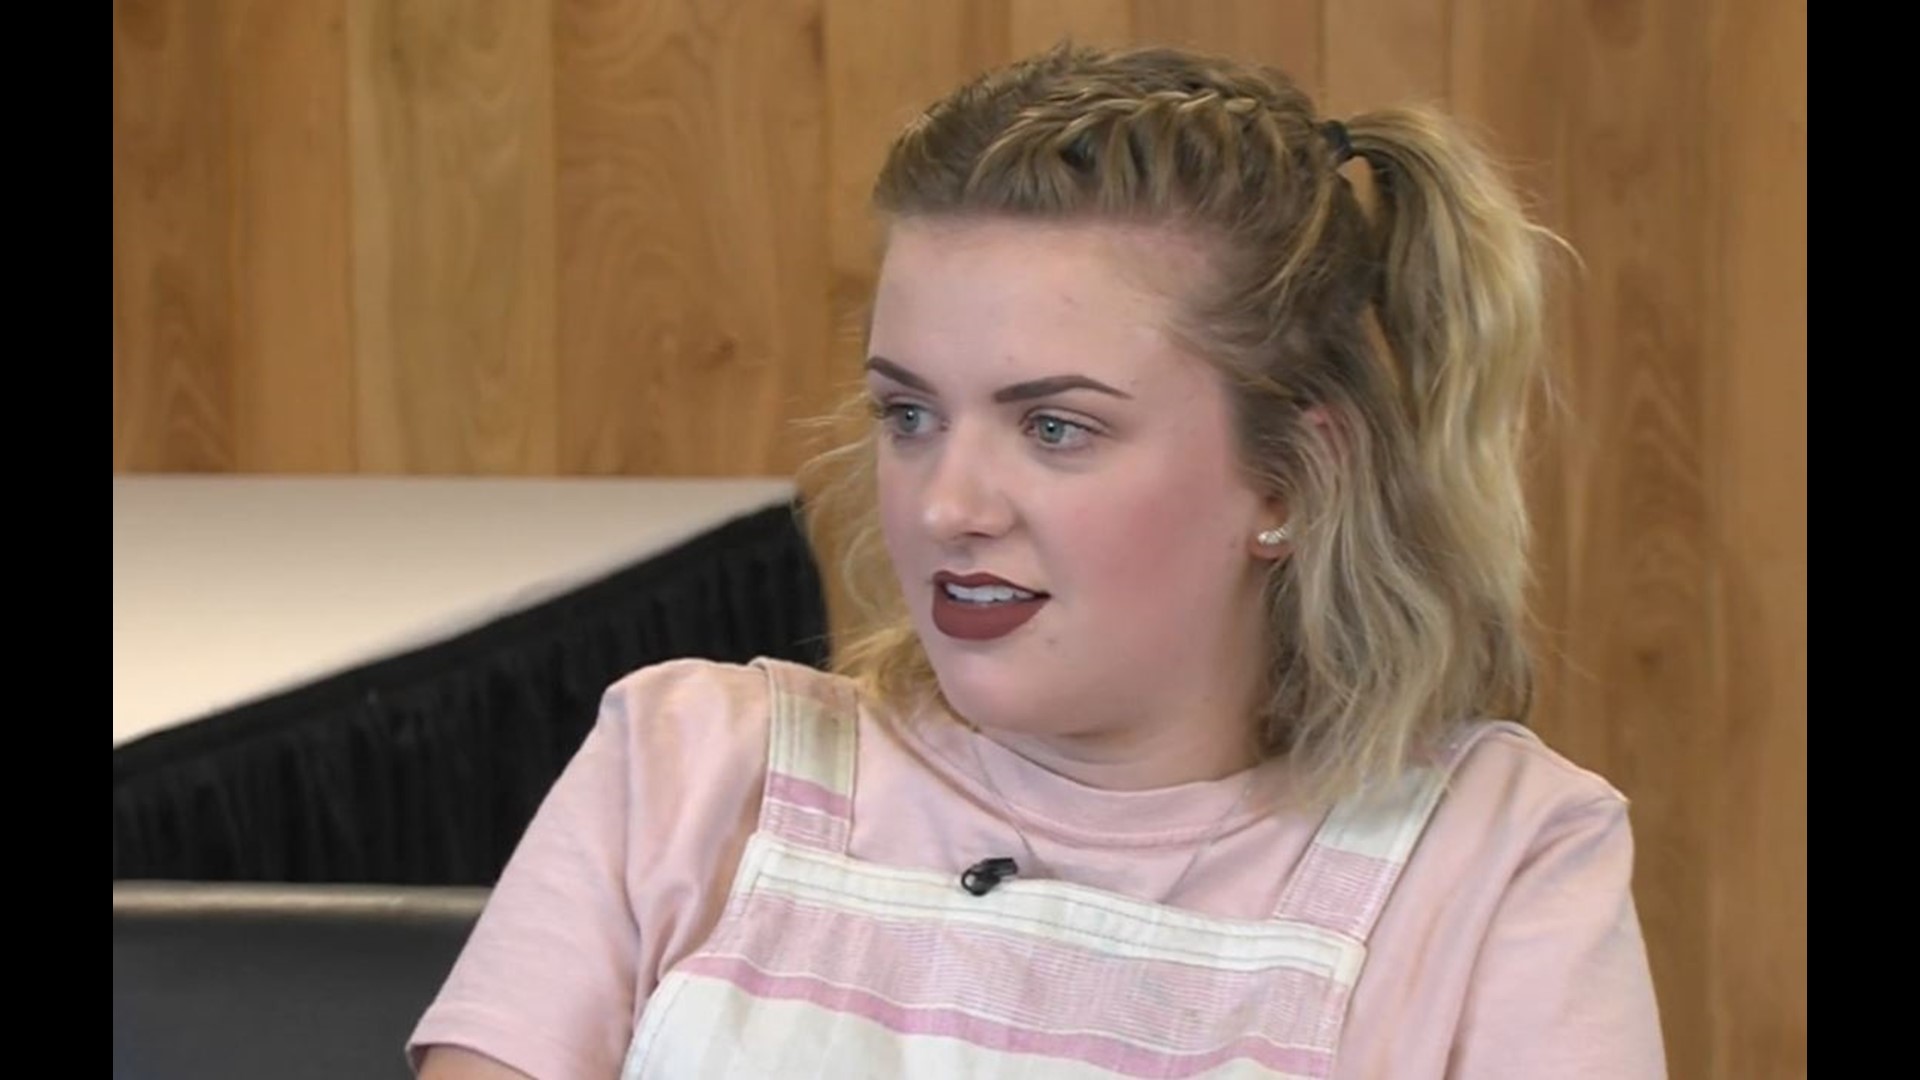 Clarksville native Maddie Poppe has been quite busy since winning 'American Idol' in late May. With a tour currently rolling through the United States to recording music in the studio, she spoke to Local 5's Brandon Lawrence about her time on the road and fond memories of Iowa.